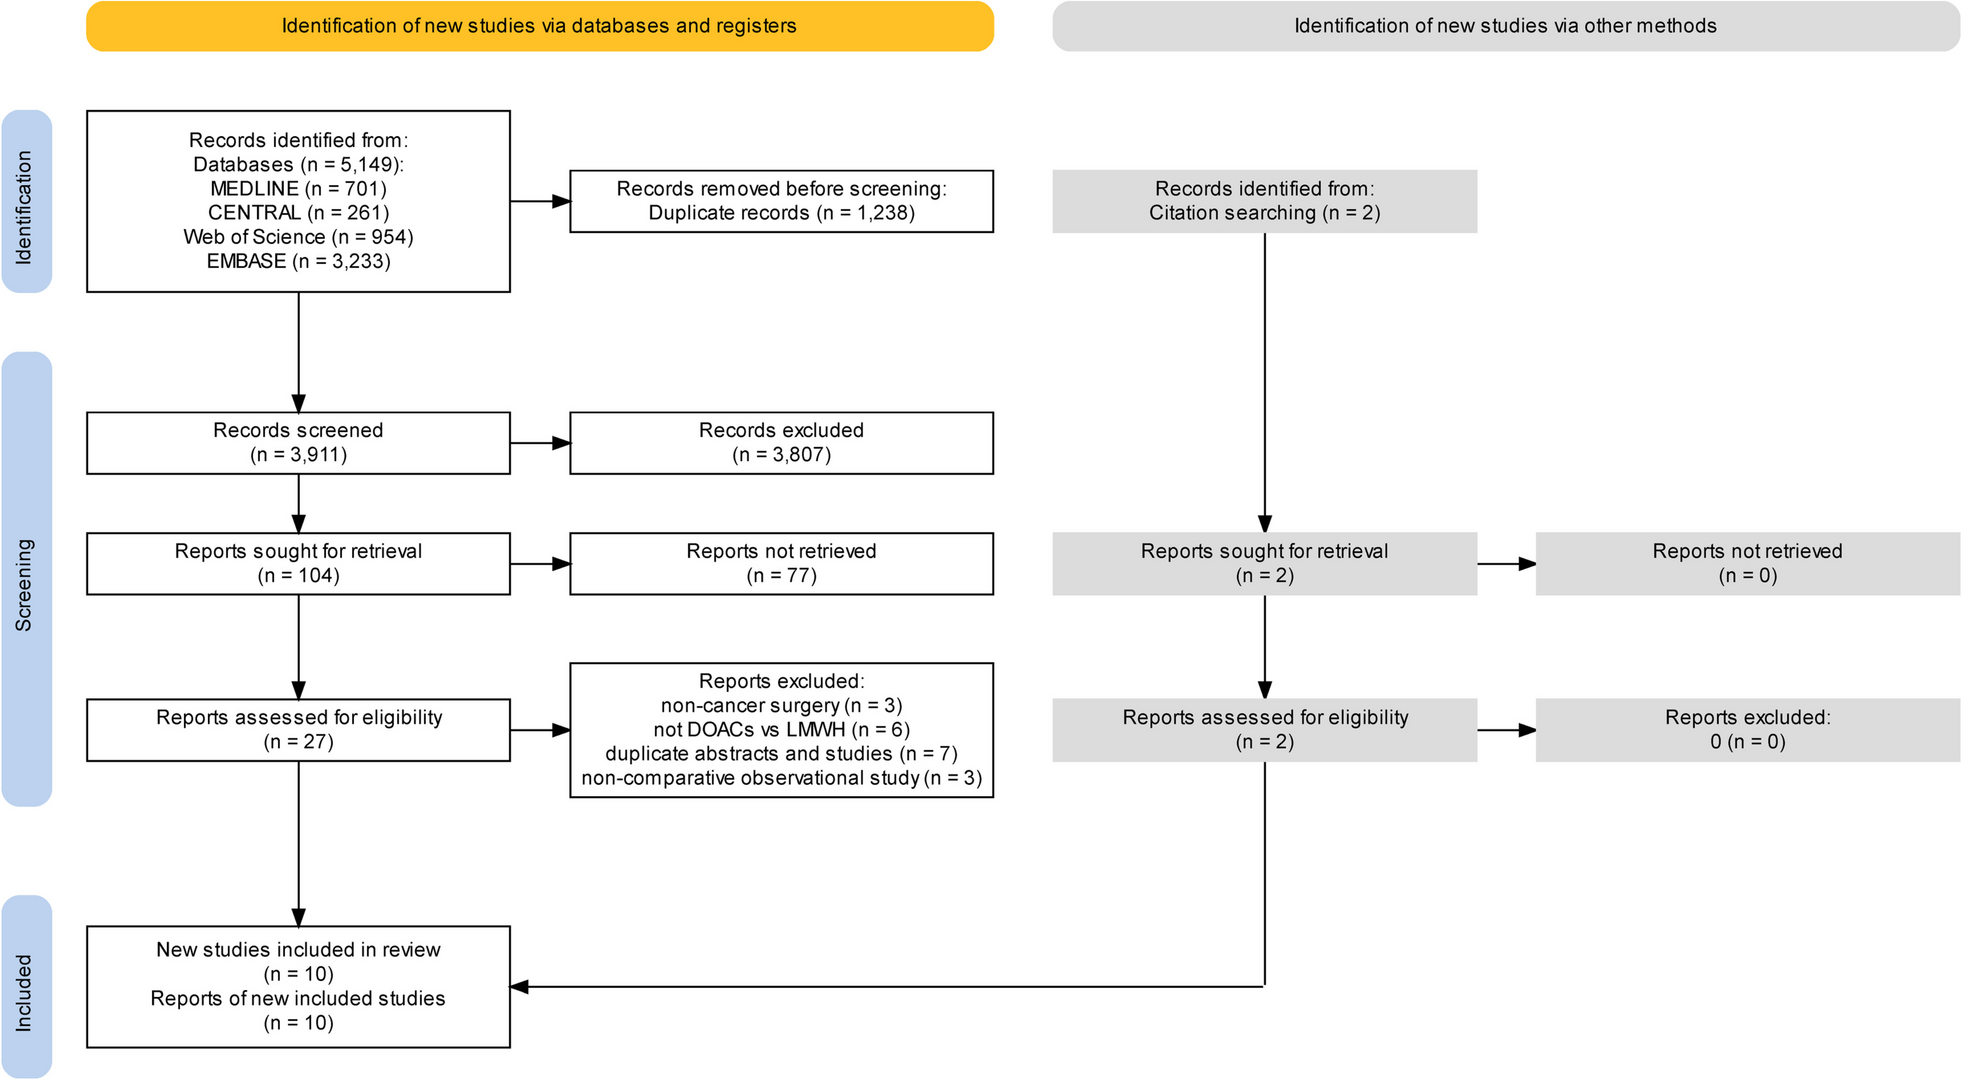 Efficacy and safety of direct oral anticoagulants versus low-molecular-weight heparin for thromboprophylaxis after cancer surgery: a systematic review and meta-analysis